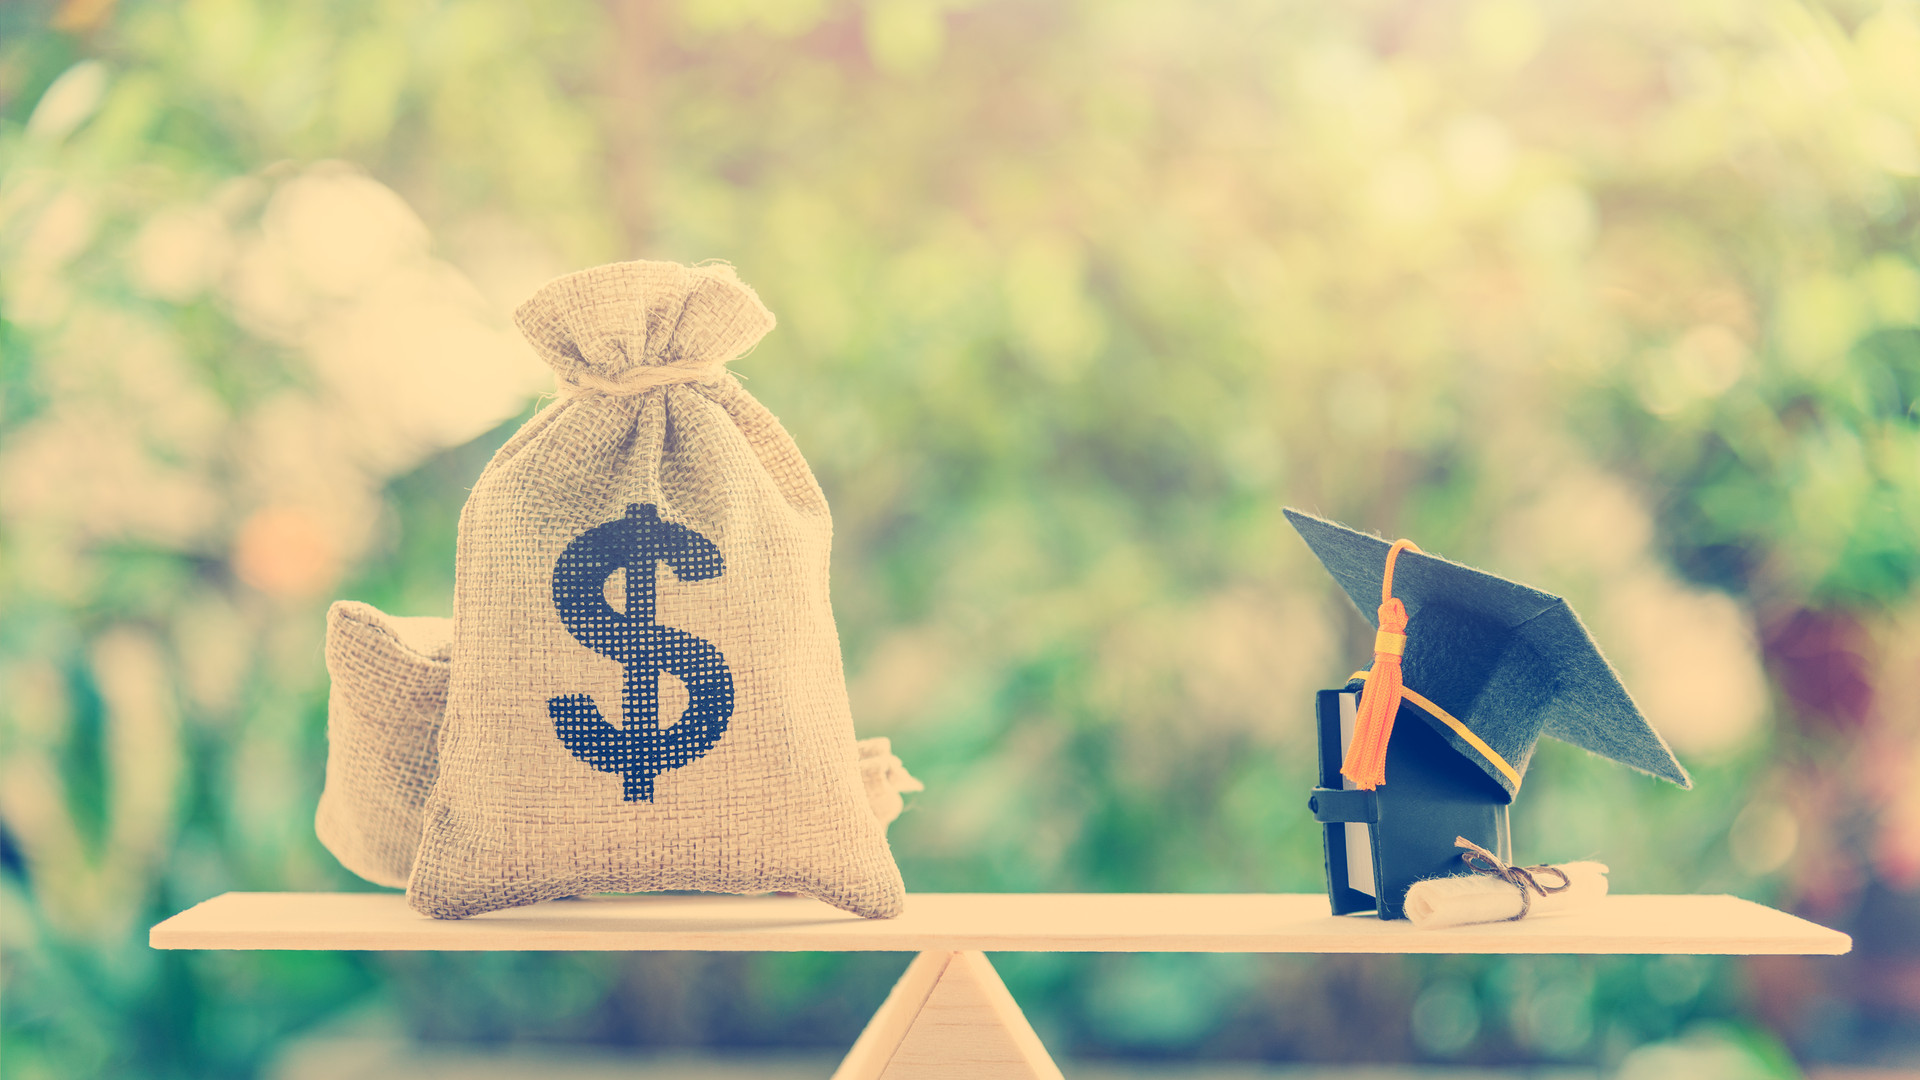 Money cost saving for goal and success in school, education concept : US dollar bills / cash in hessian bags, a black graduation cap or hat, a certificate / diploma and a book on simple balance scale.